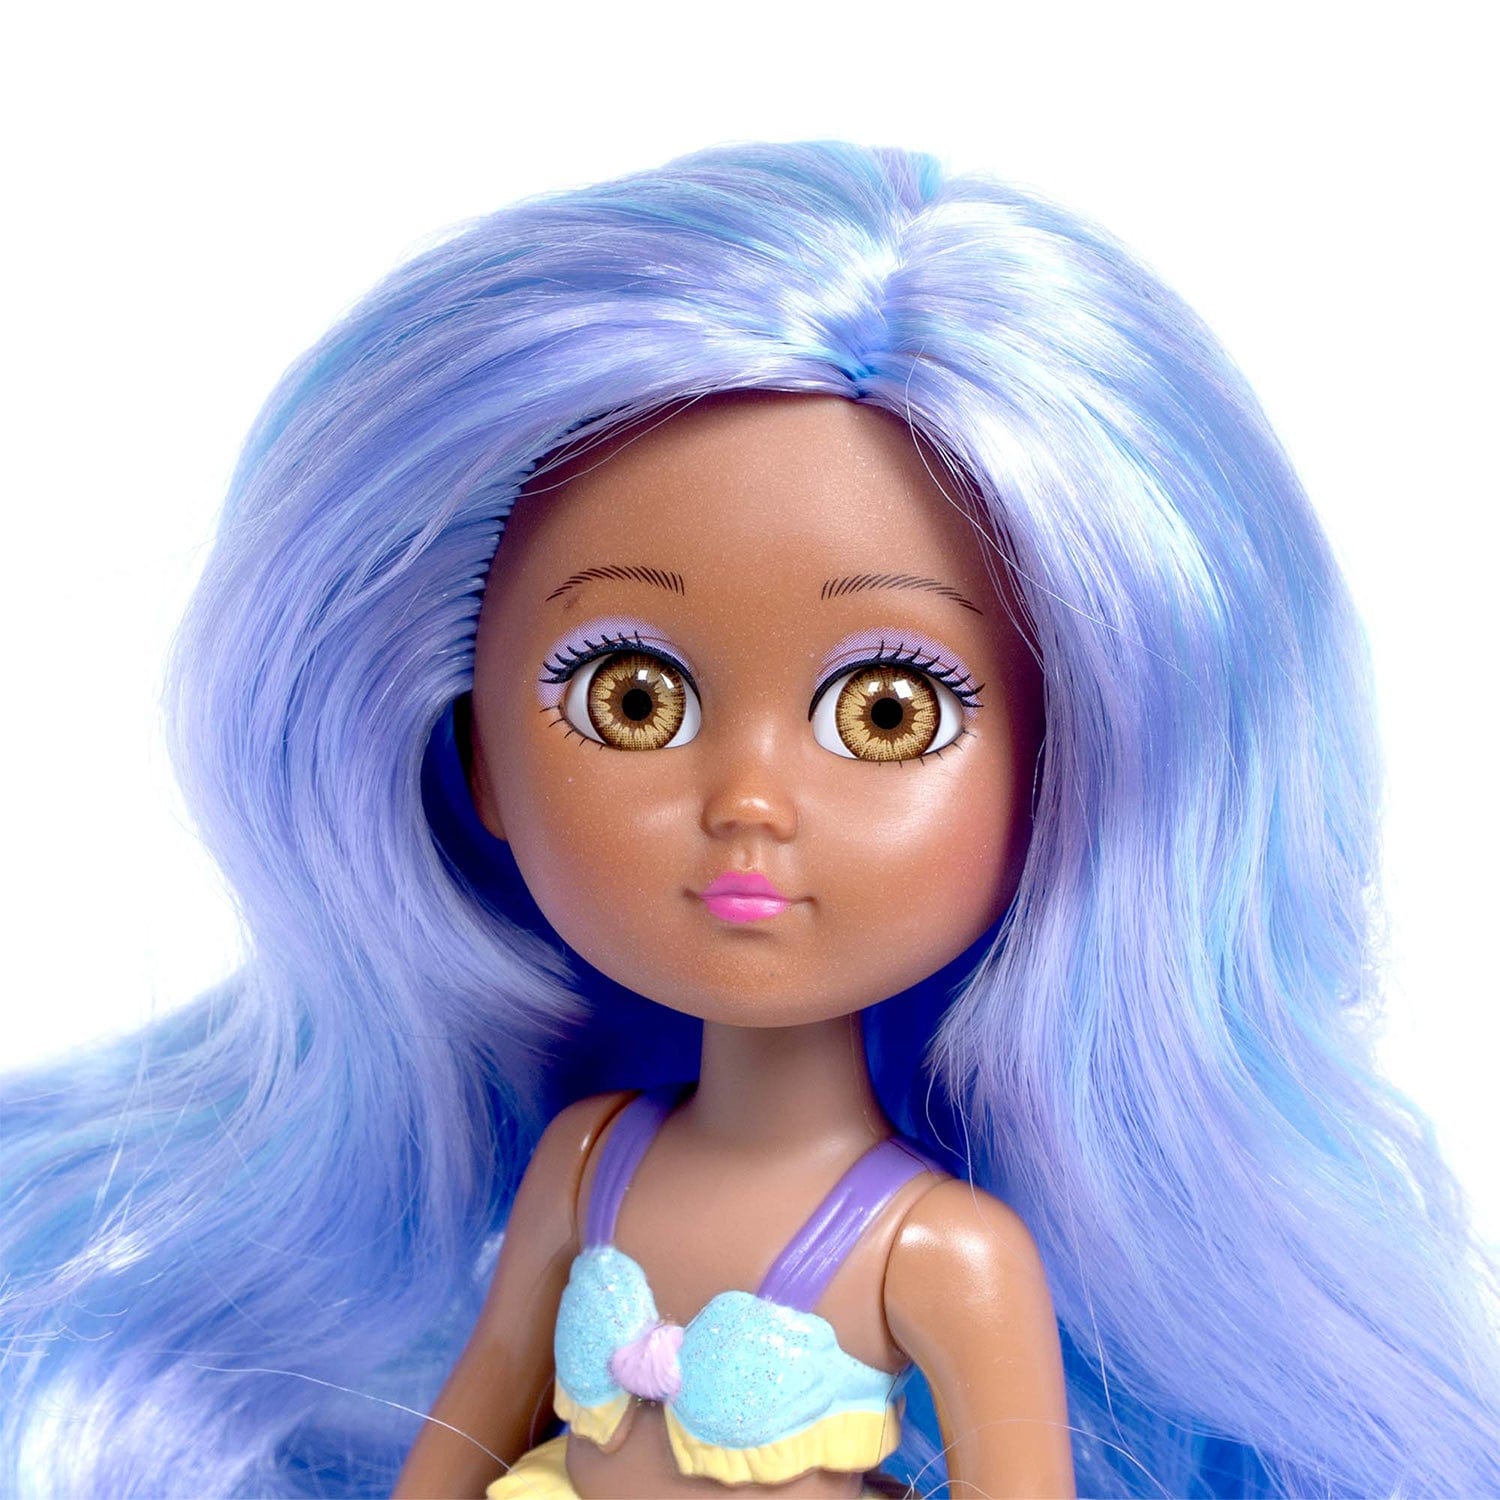 Water Wonder Oceana mermaid doll has light purple hair with blue highlights, a glittery blue bikini top, and yellow ruffle accents. Her beautiful mermaid doll tail changes from light blue to purple when she’s swimming in cold water. Ages 1+.